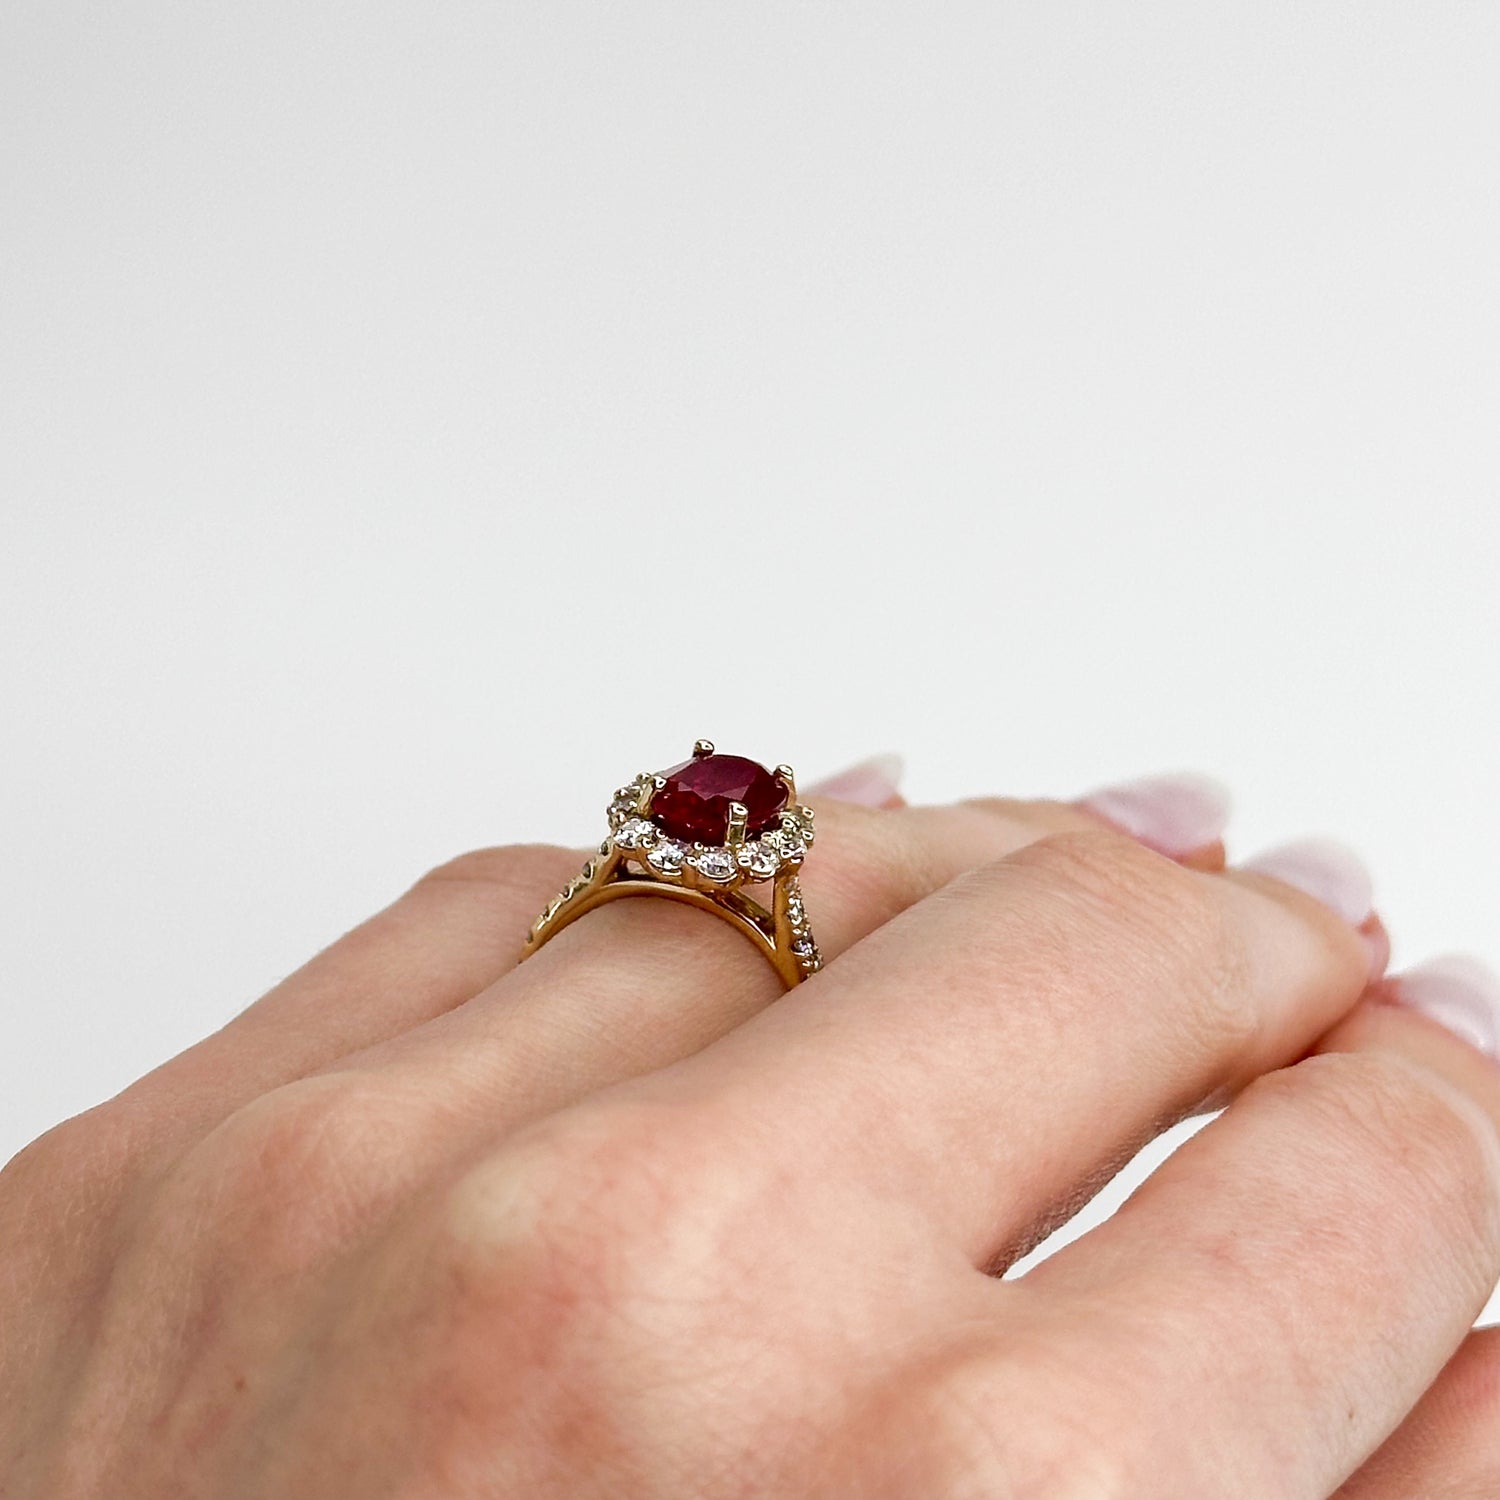 2.75ct Oval Cut Ruby Ring with Diamond Halo